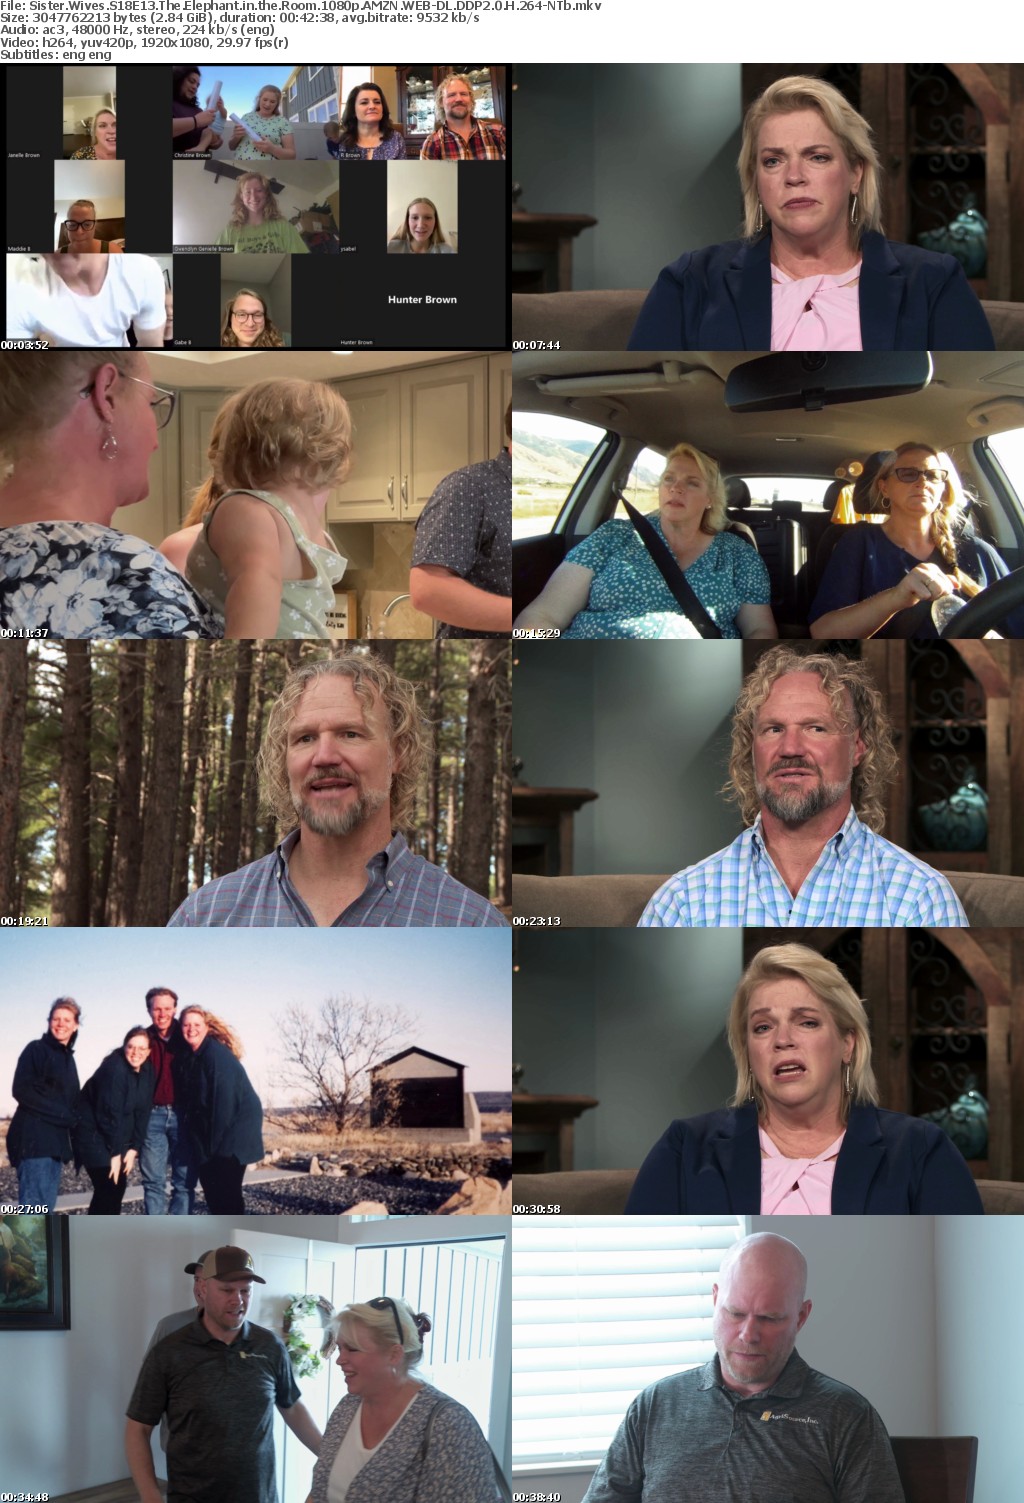 Sister Wives S18E13 The Elephant in the Room 1080p AMZN WEB-DL DDP2 0 H 264-NTb